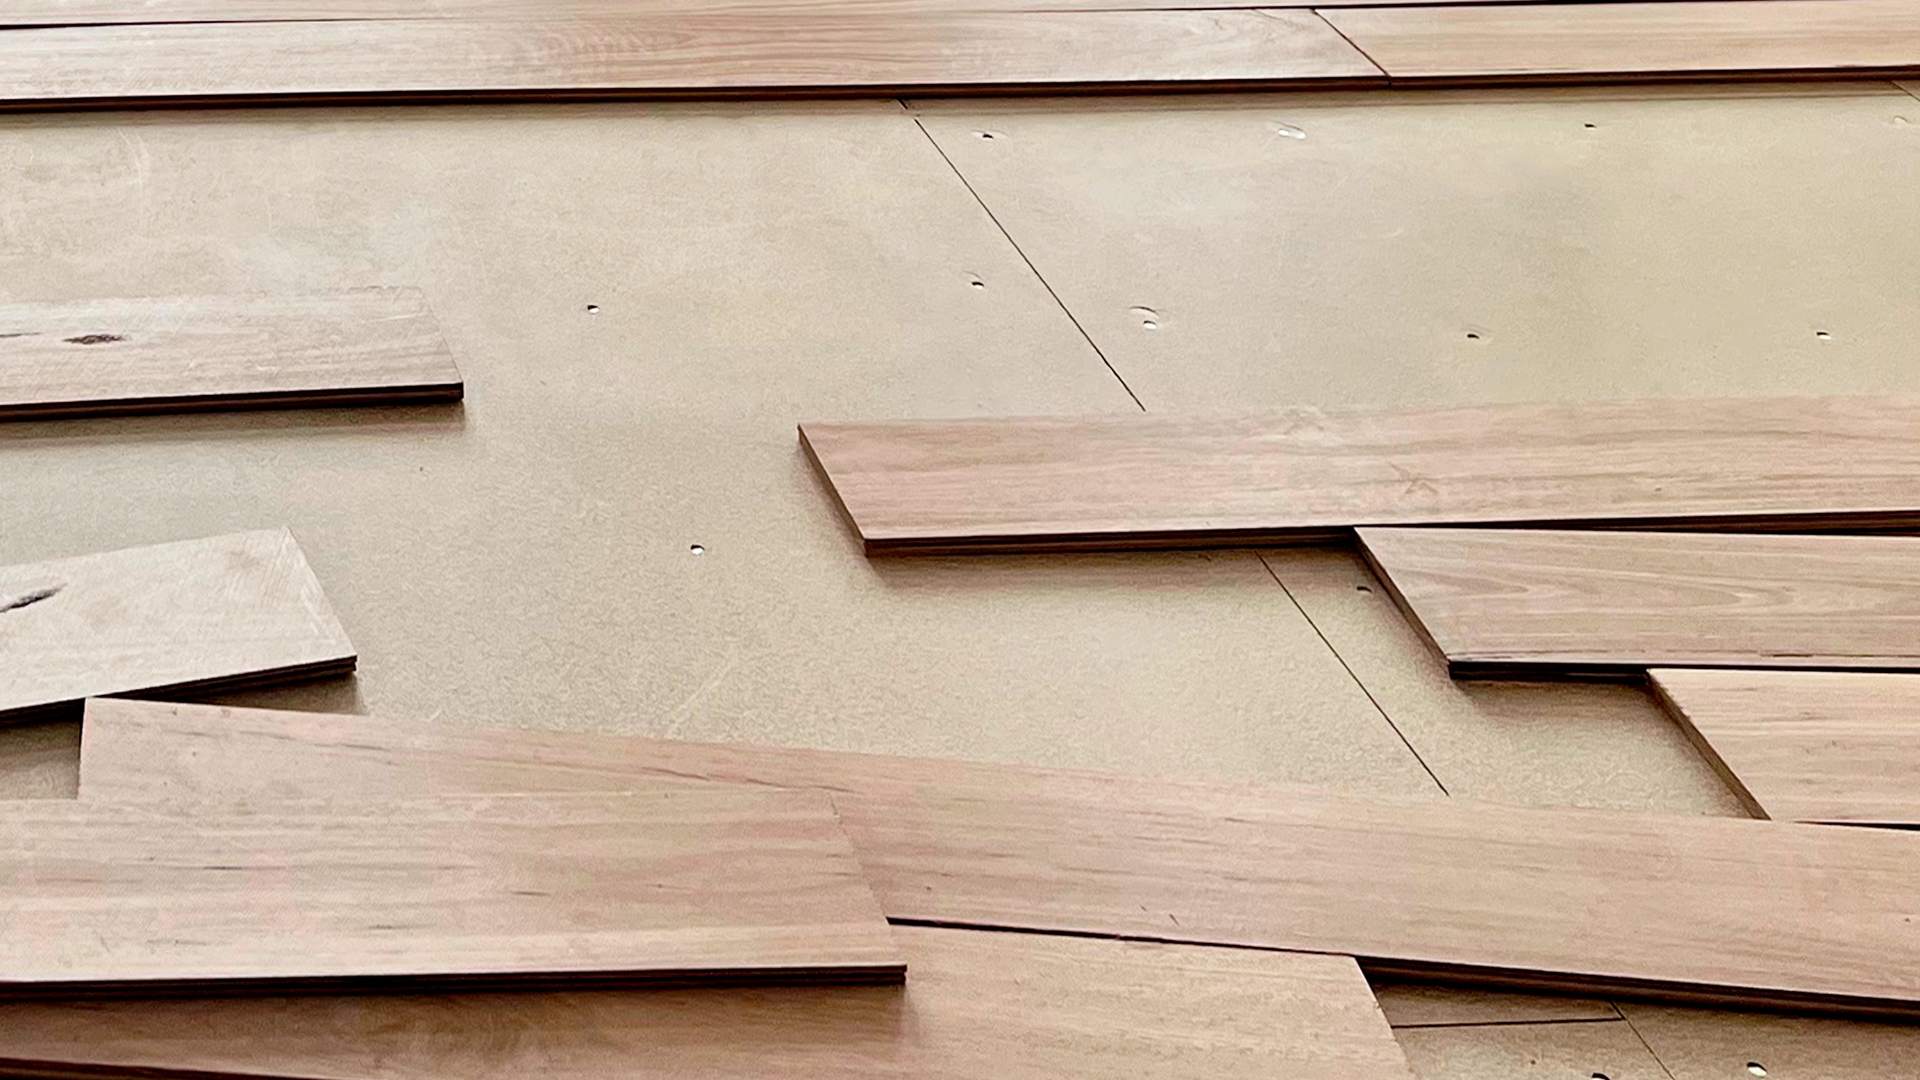 The crucial role of adhesion strength in timber flooring underlay